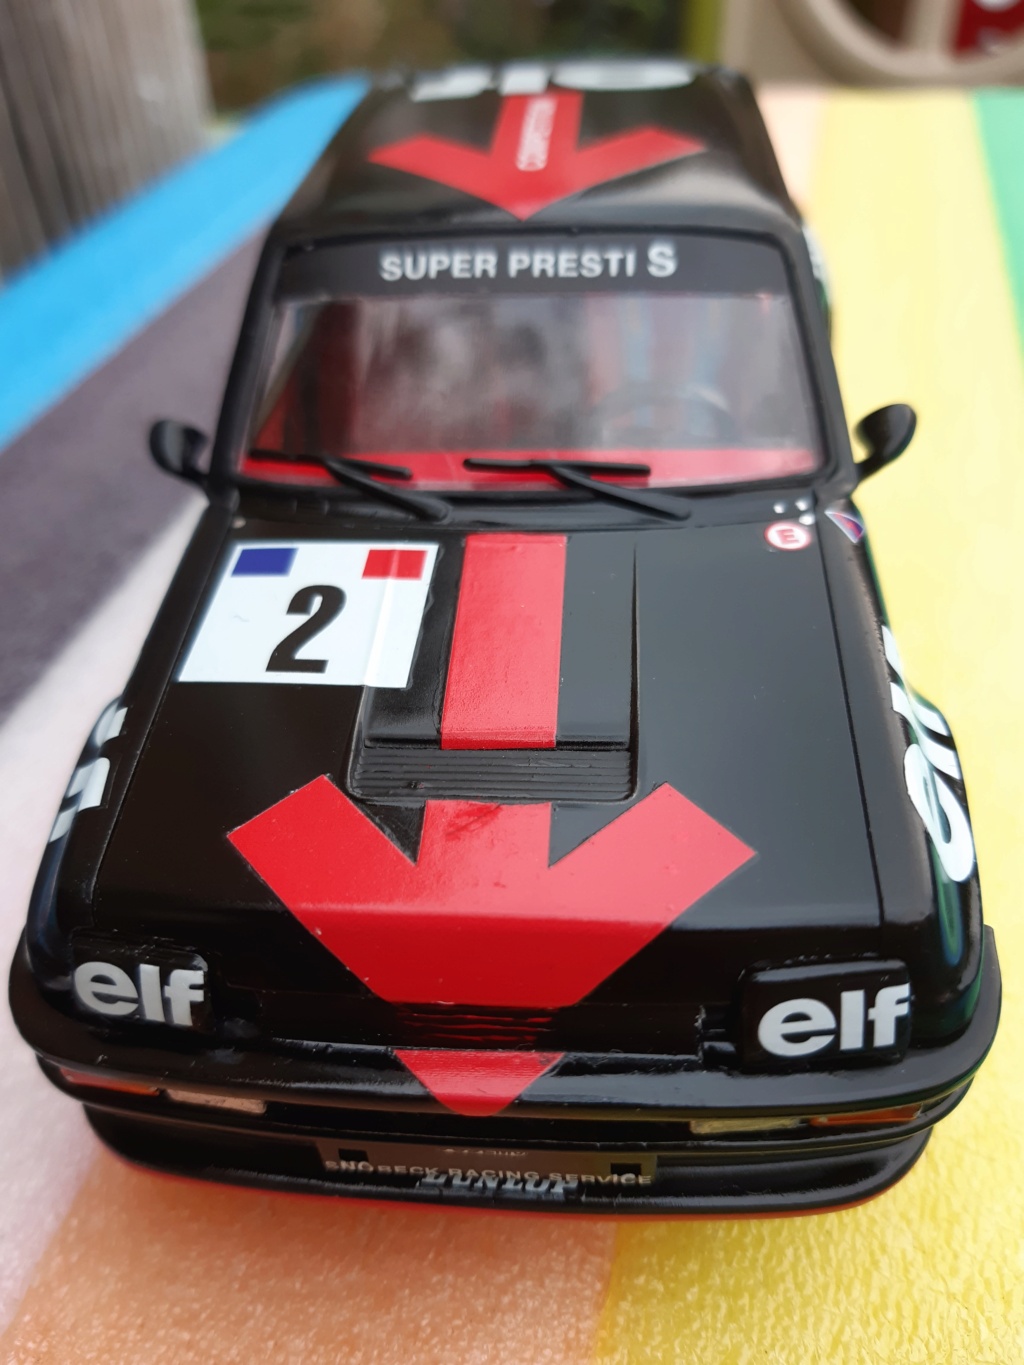 Renault 5 turbo europa cup 82 sur base Heller 1:24 - Page 3 20210833